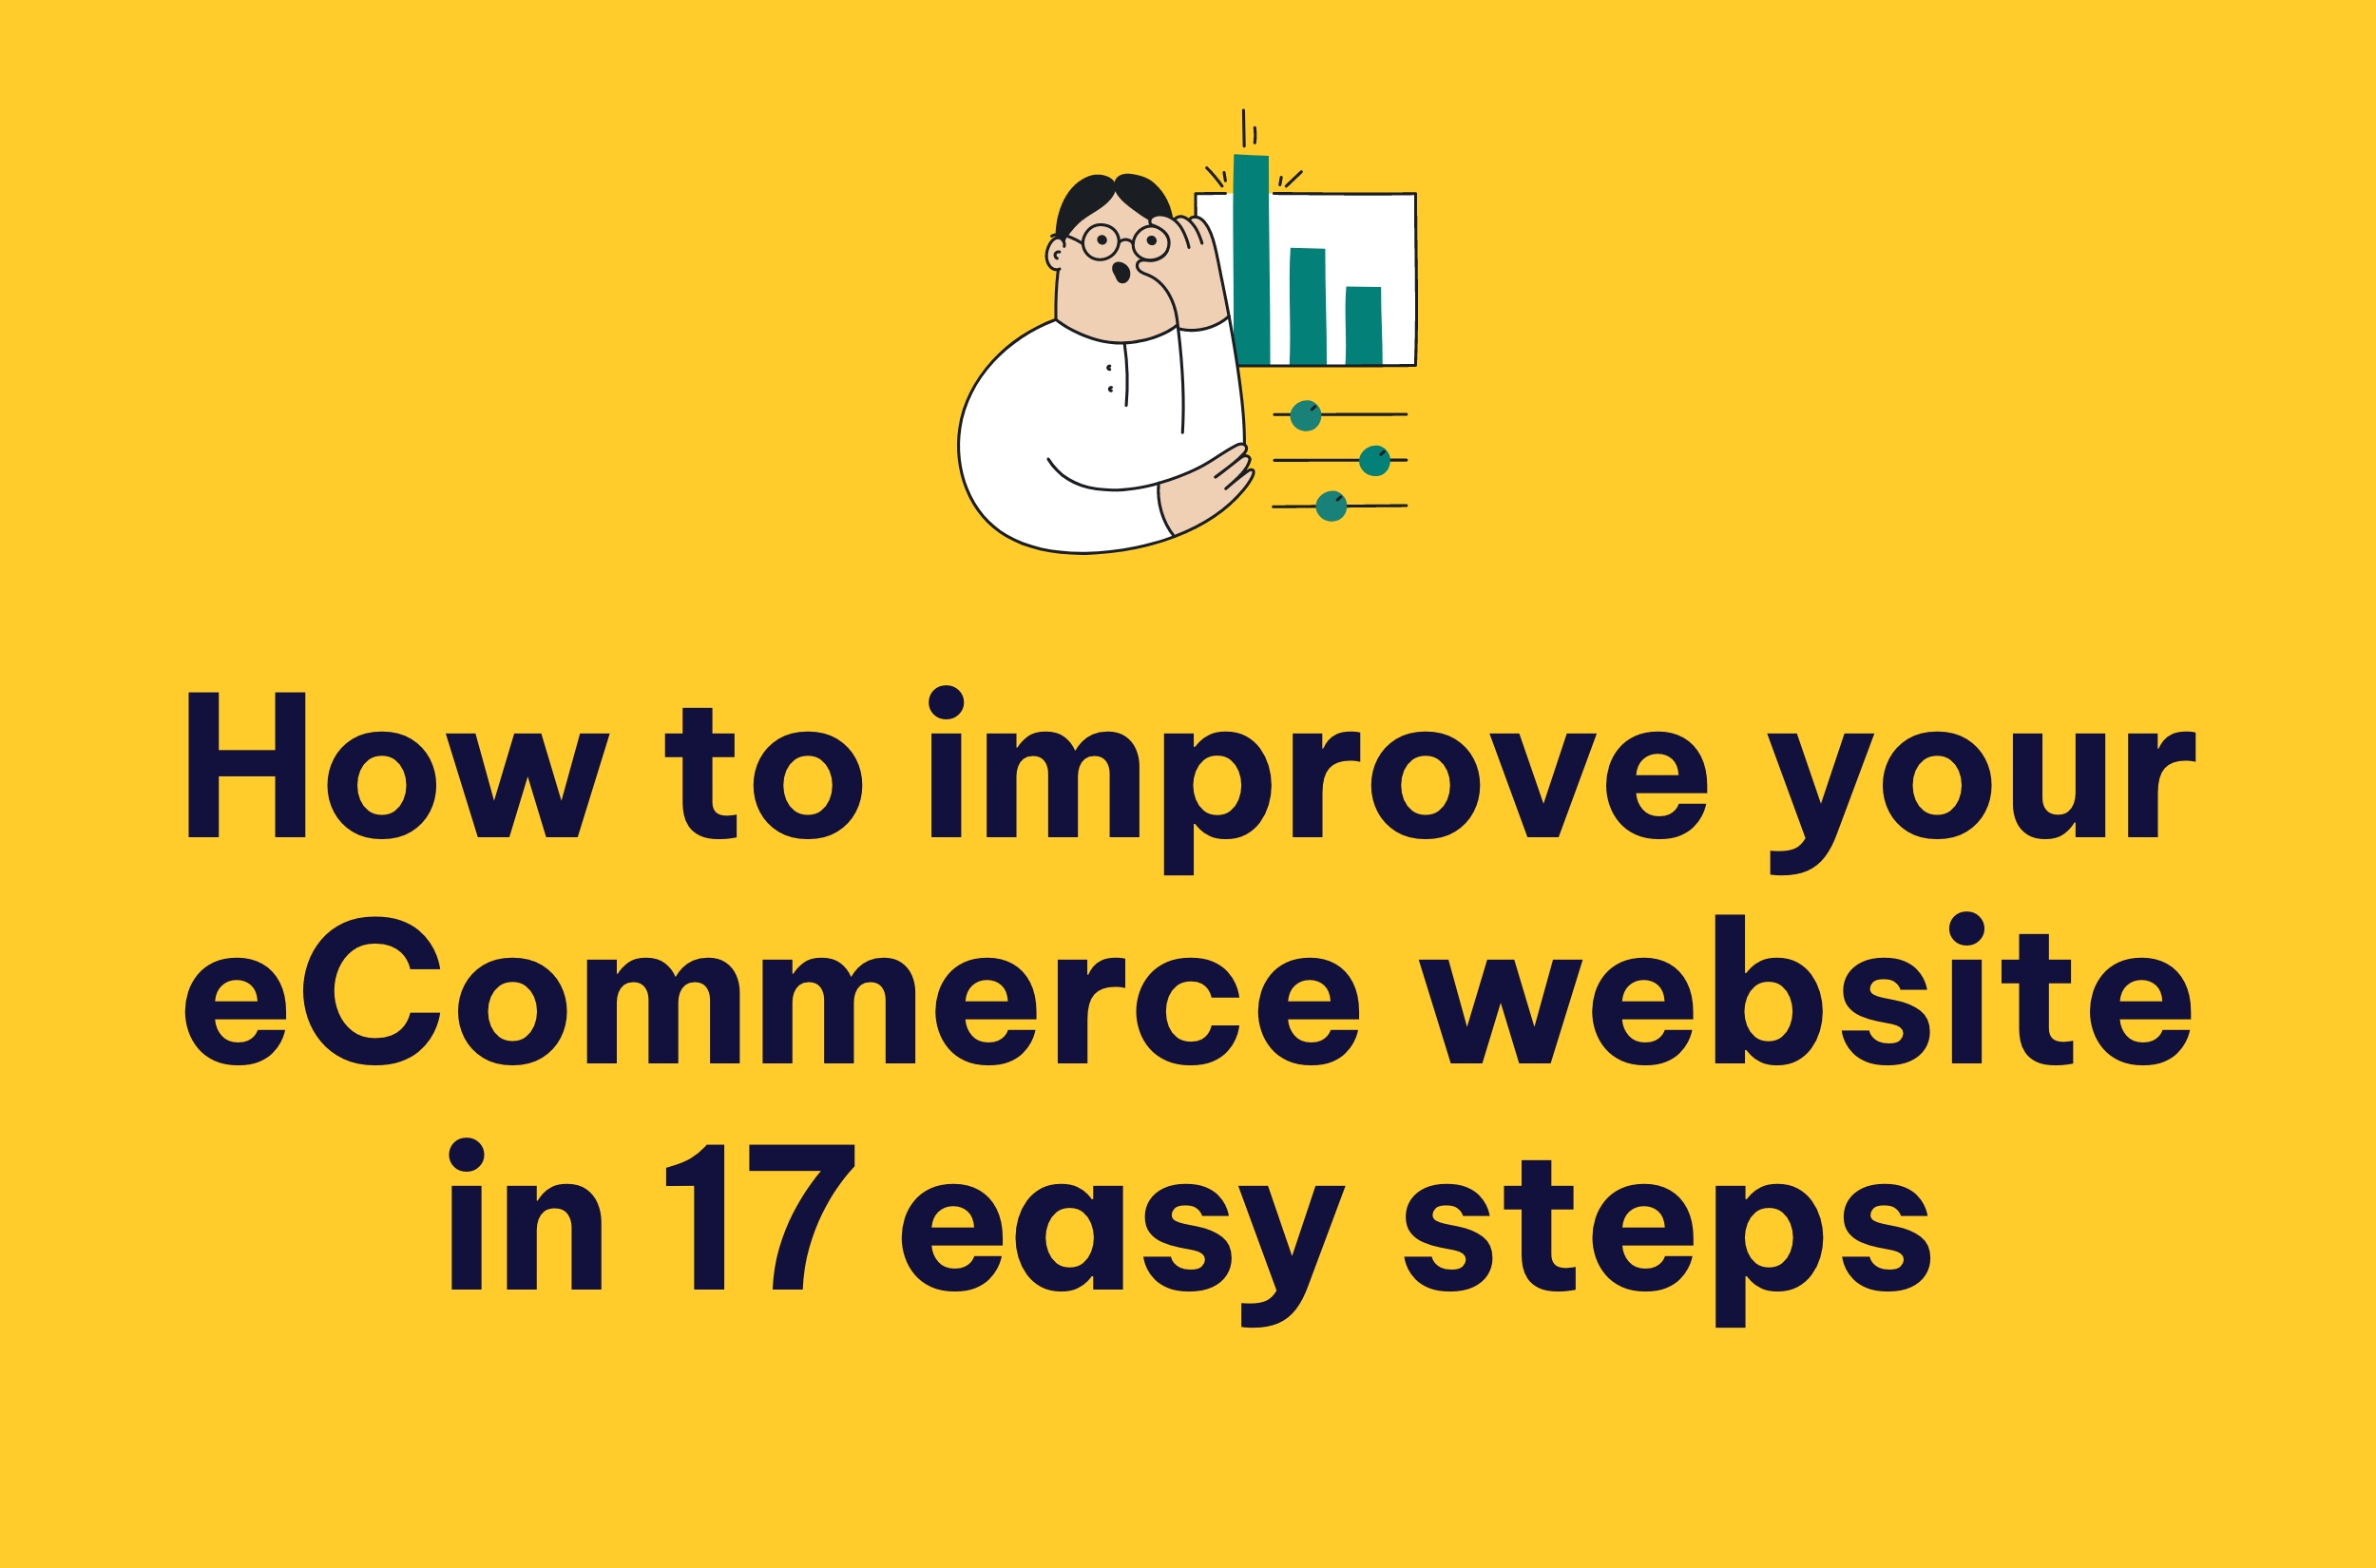 How to improve your eCommerce website in 17 easy steps